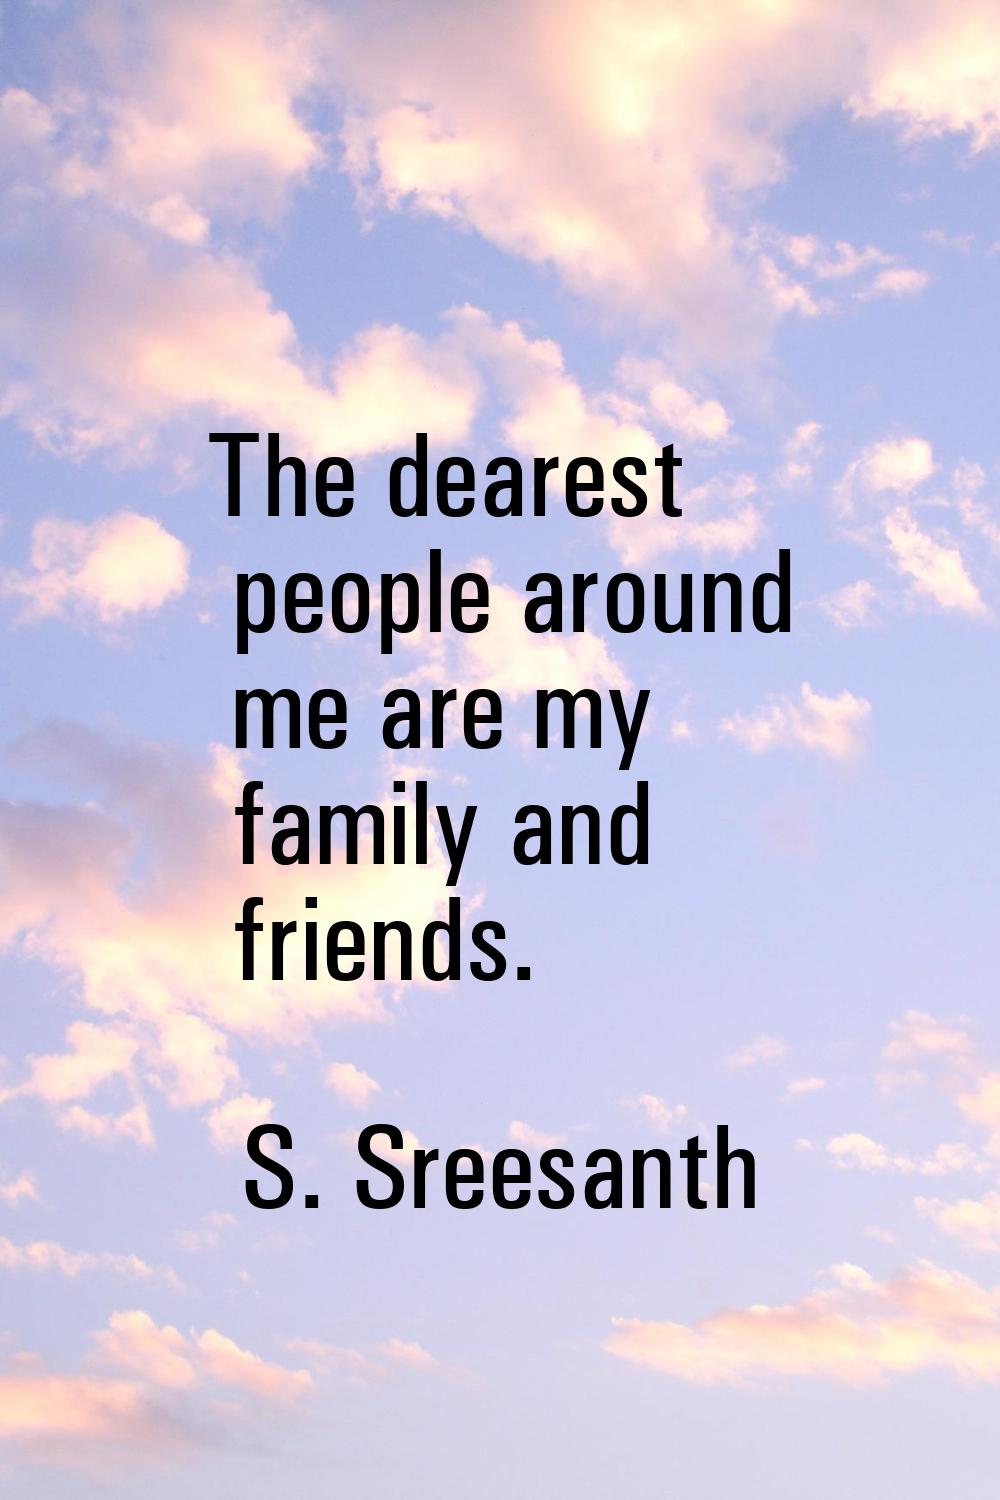 The dearest people around me are my family and friends.